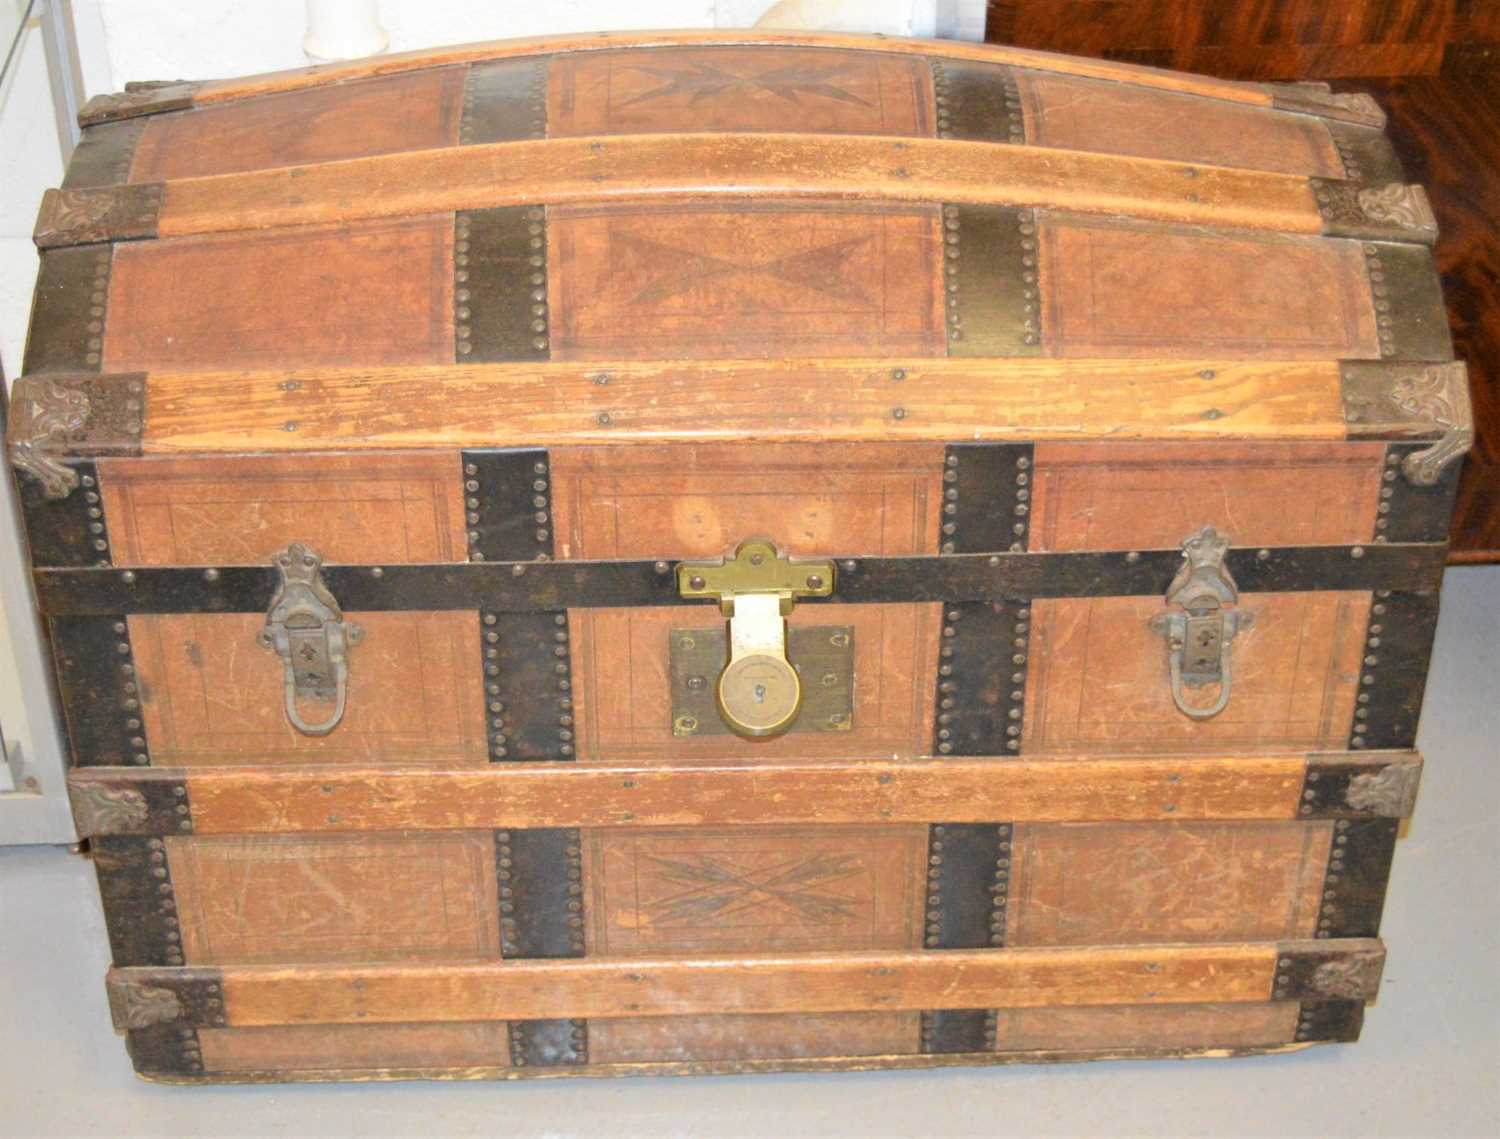 An antique dome top traveling trunk clad in leather and metal work straps, twin leather handles - Image 2 of 2